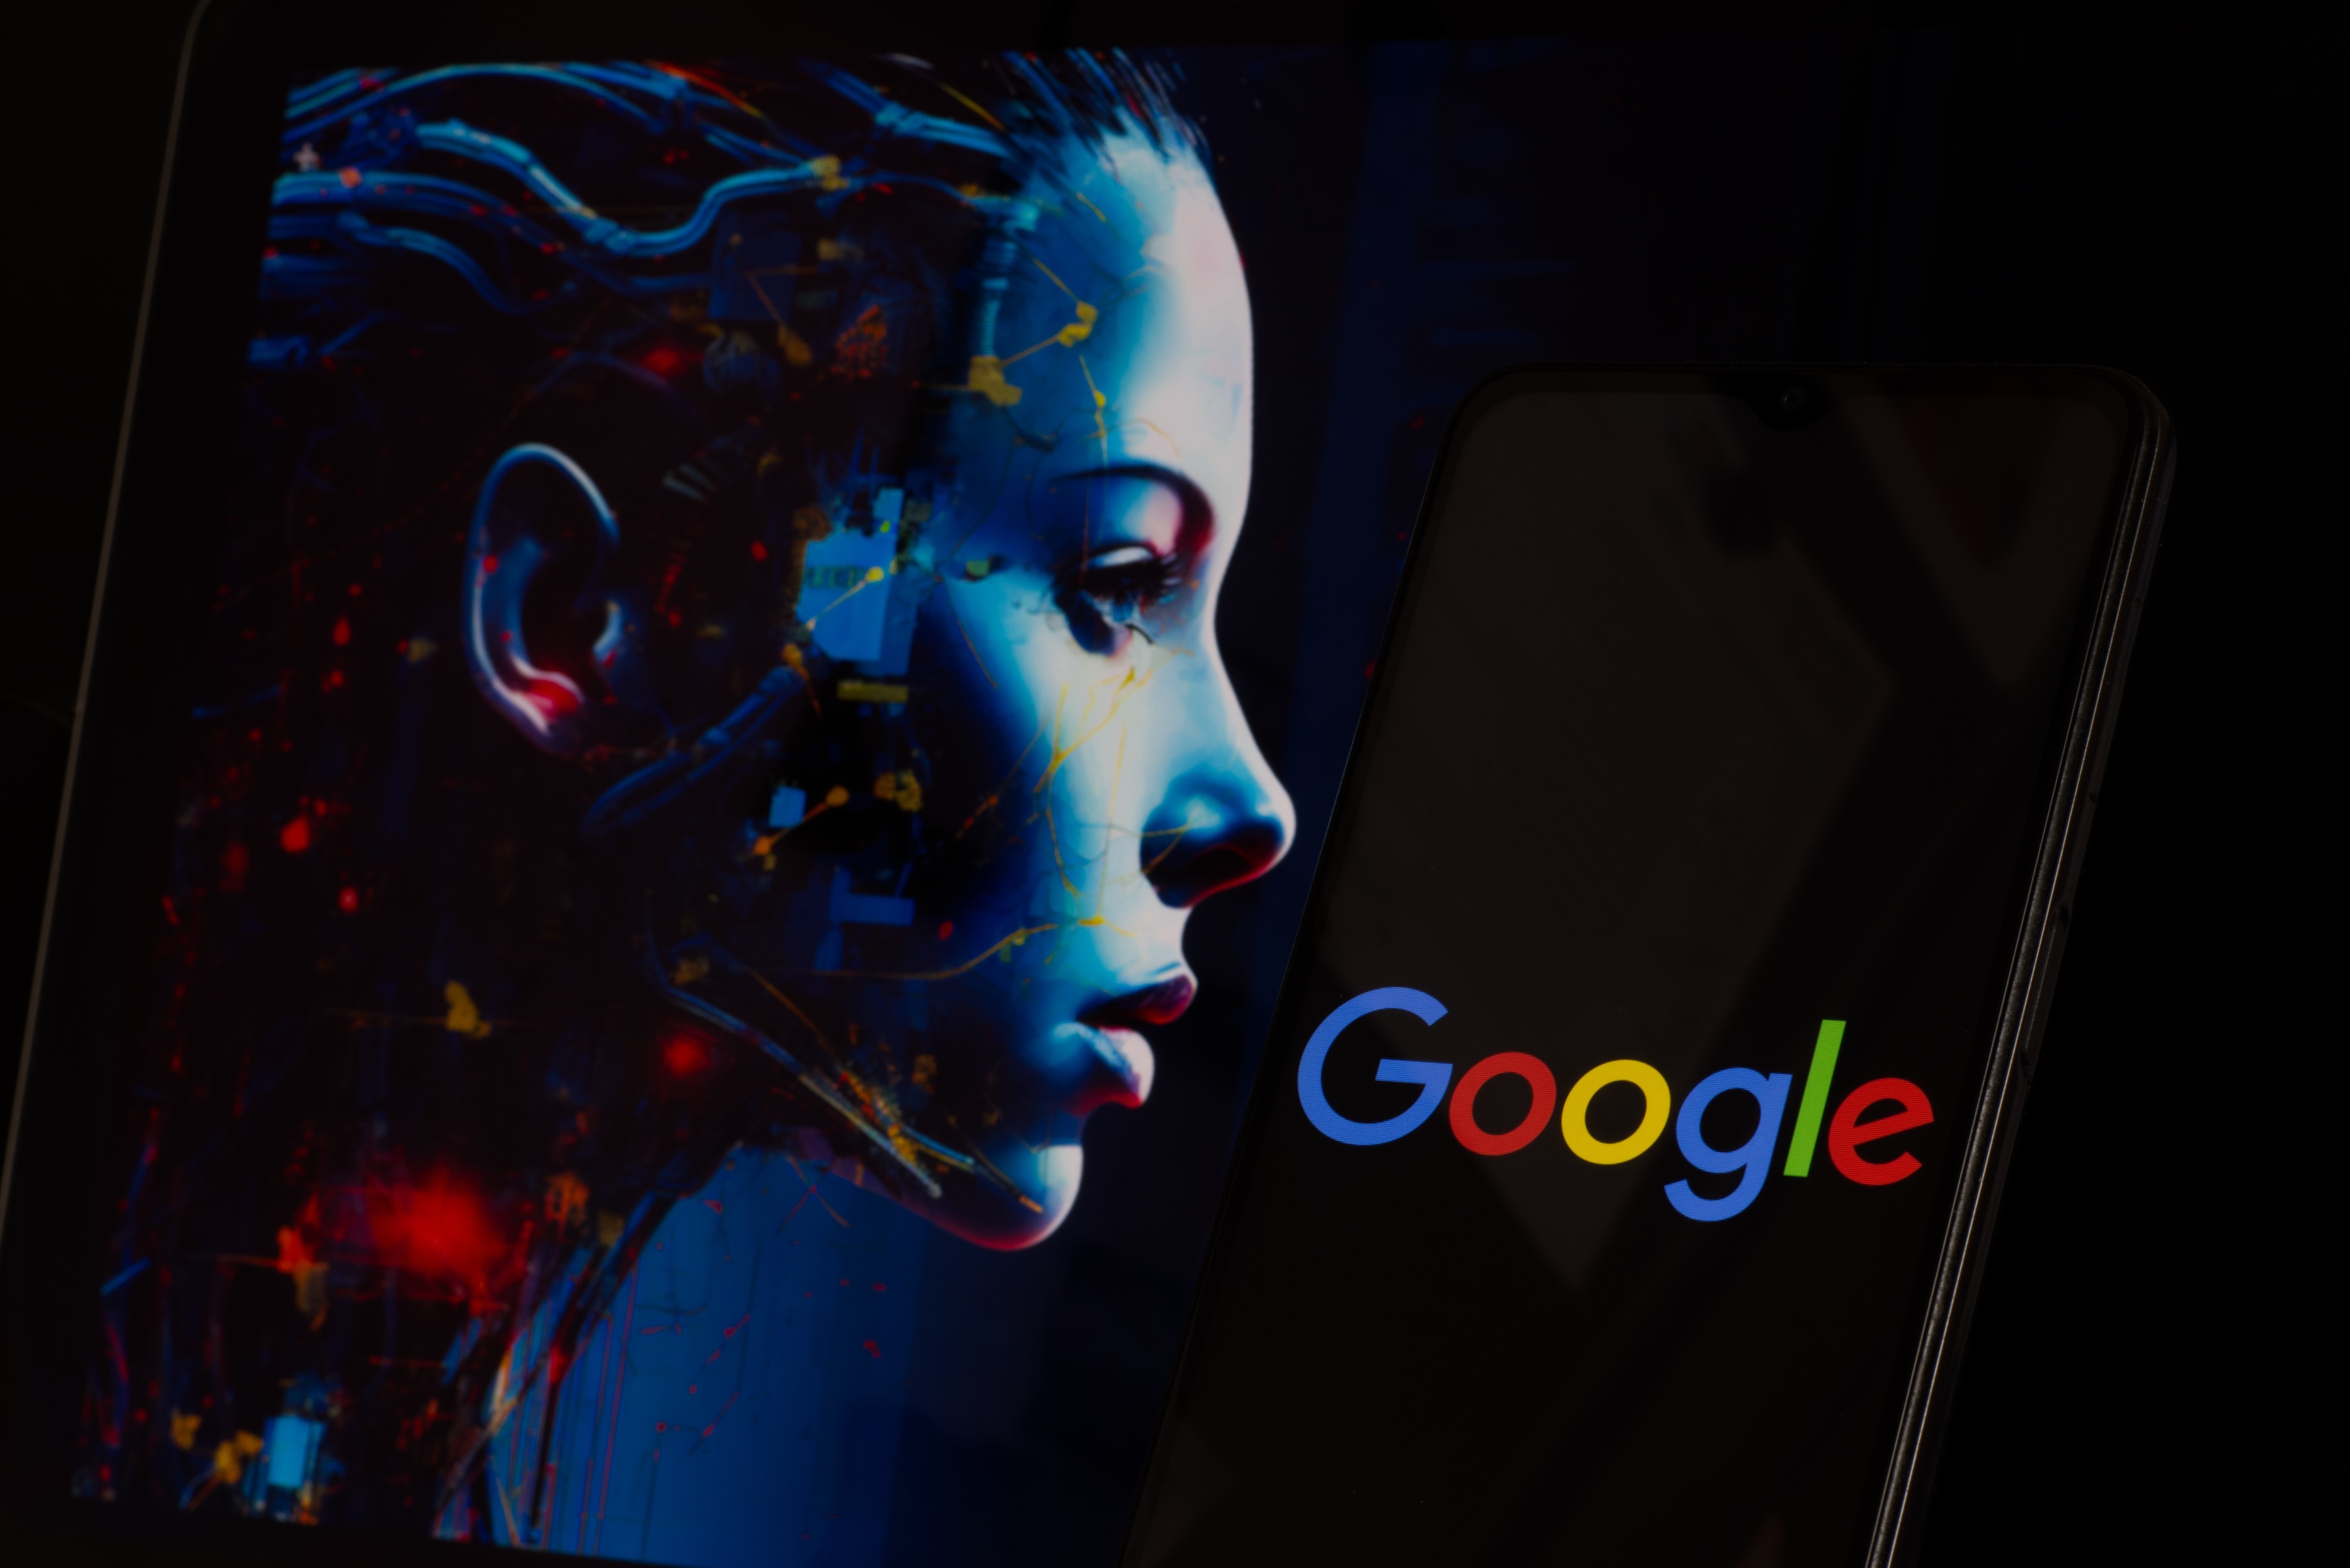 AI humanoid face next to the Google logo on a mobile phone